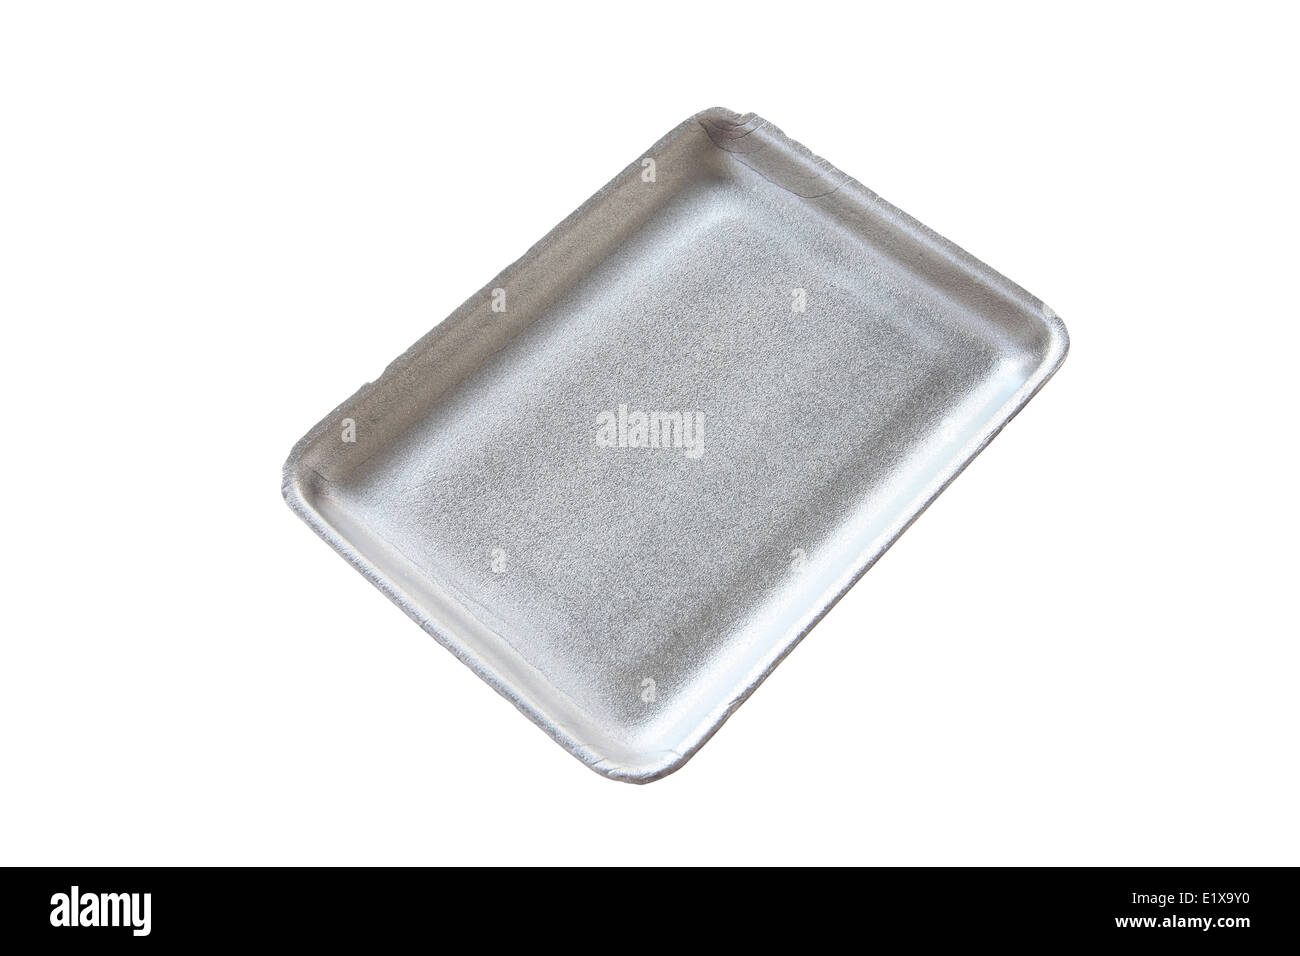 Black empty food tray or foam food container isolated on white background. Stock Photo